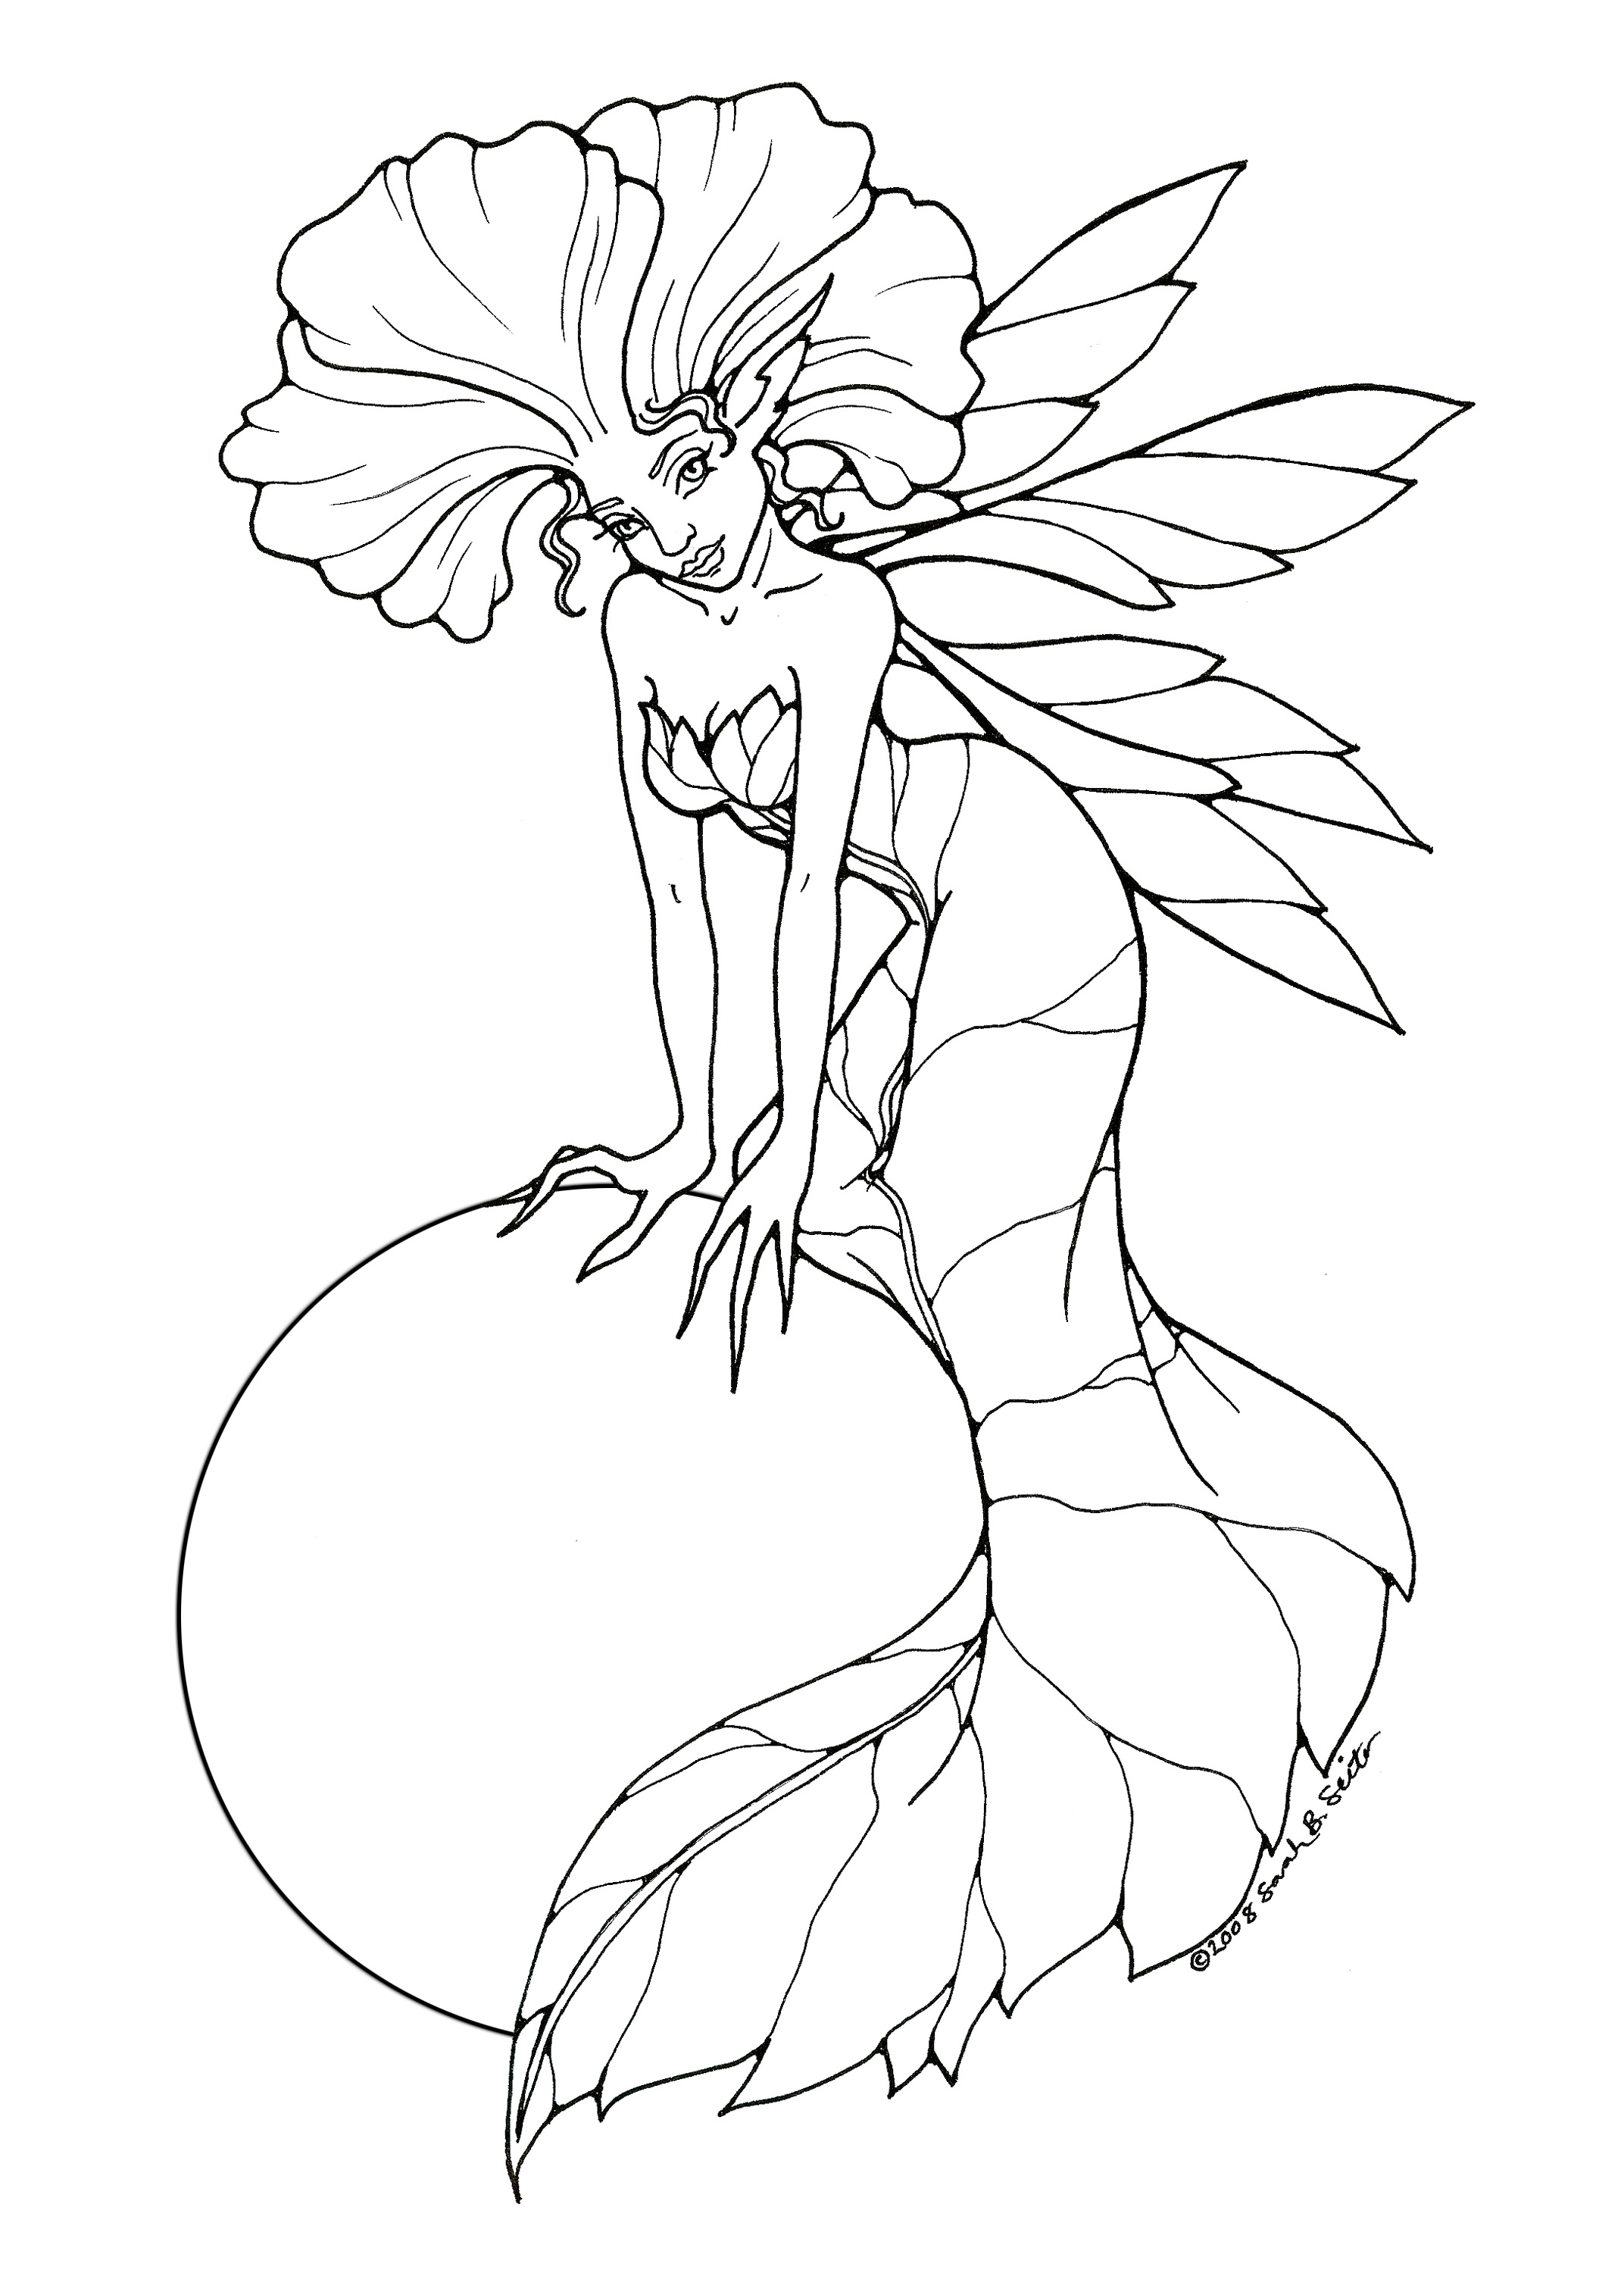 Beautiful anime fairy Coloring Pages  Fairy Coloring Pages  Coloring Pages  For Kids And Adults